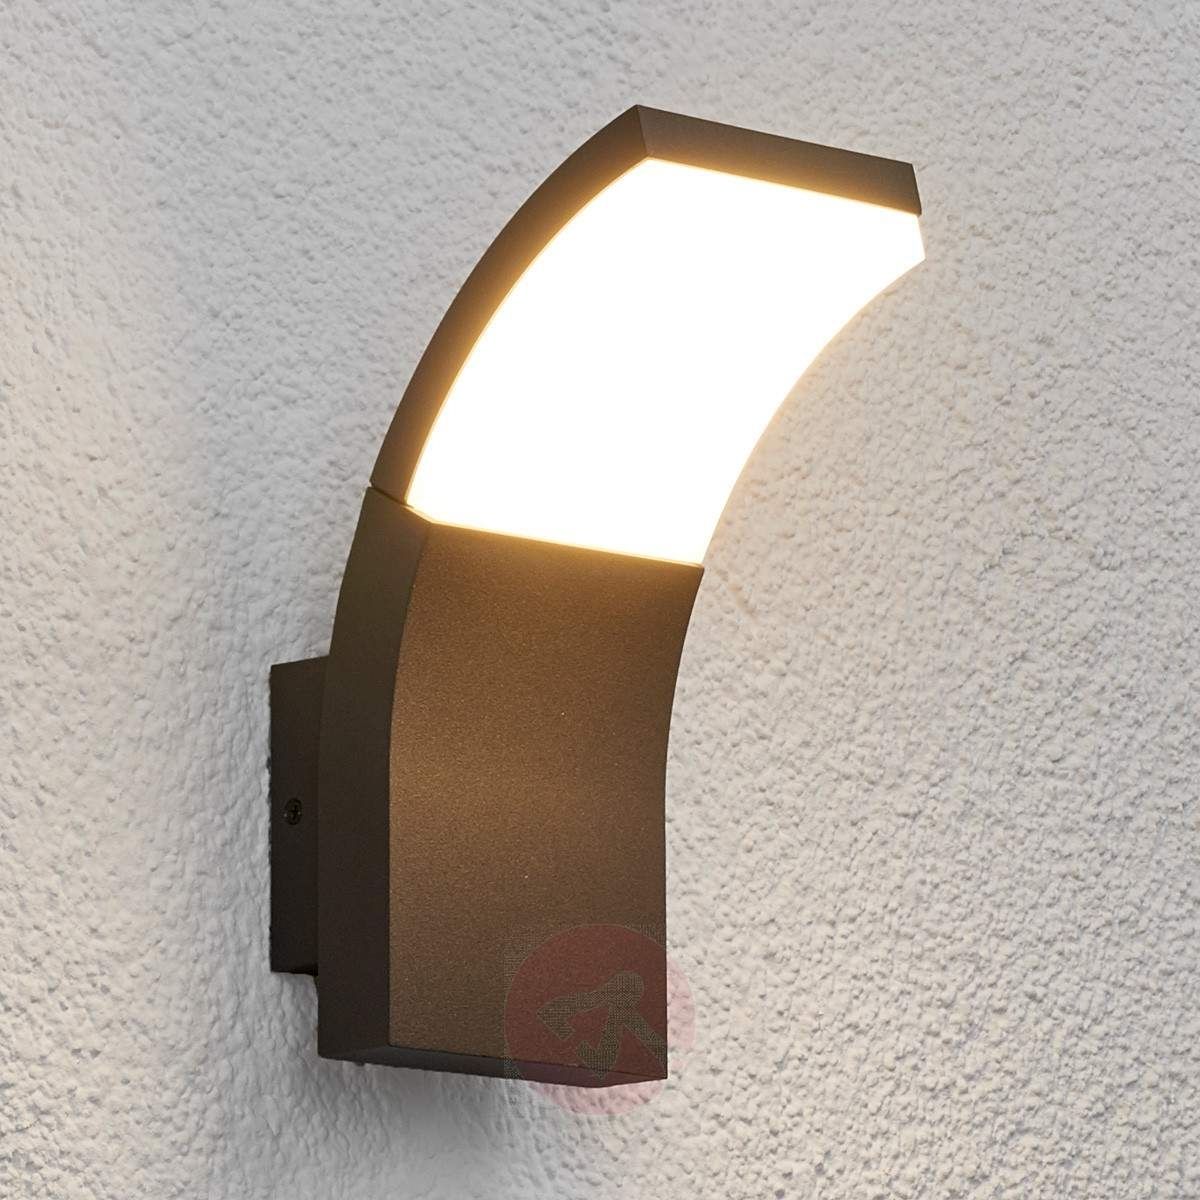 Most Recently Released Led Outdoor Wall Light Timm Lights Co Uk Brilliant Led In 4 In Outdoor Wall Lighting At Wayfair (View 20 of 20)